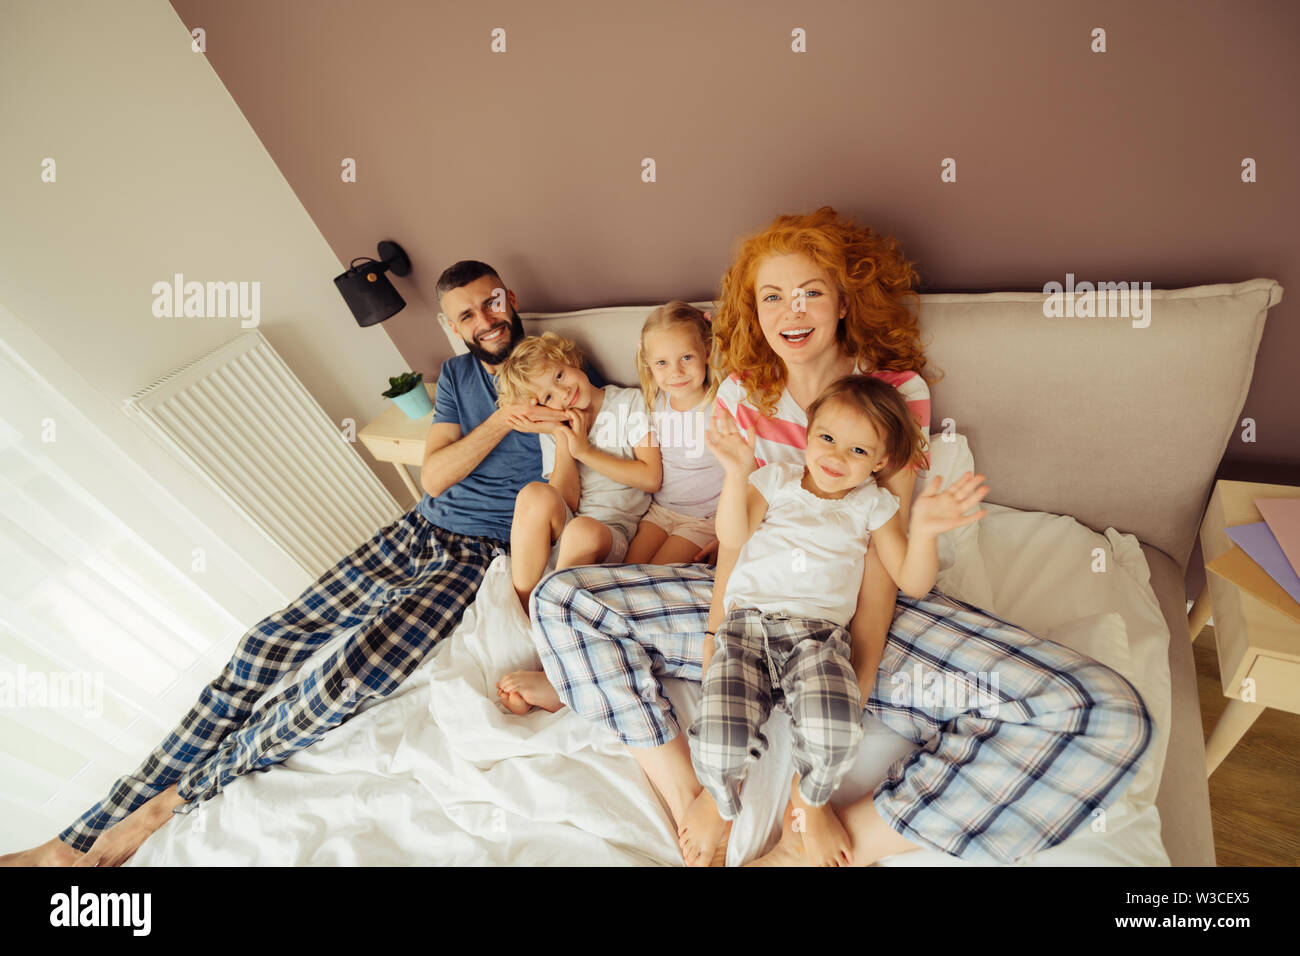 Happiness and fun. Positive joyful family sitting together on the bed while enjoying their time Stock Photo